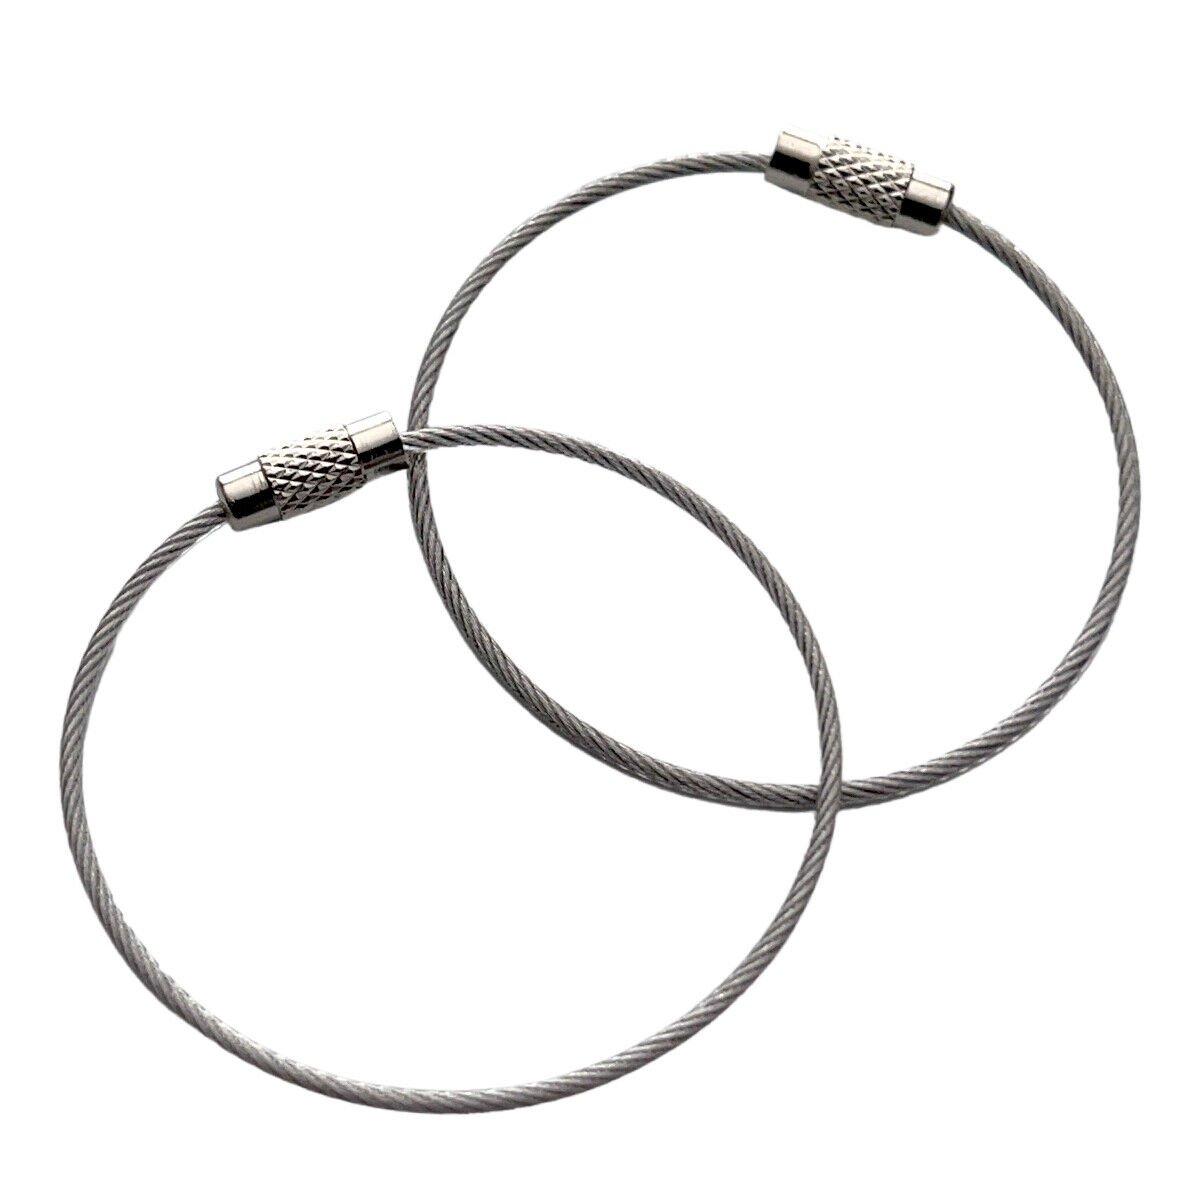 2 Pack - Wire Luggage Loops - Stainless Steel 6" Cable Rings for Bag Tags, Keys Specialist ID SPID-8170